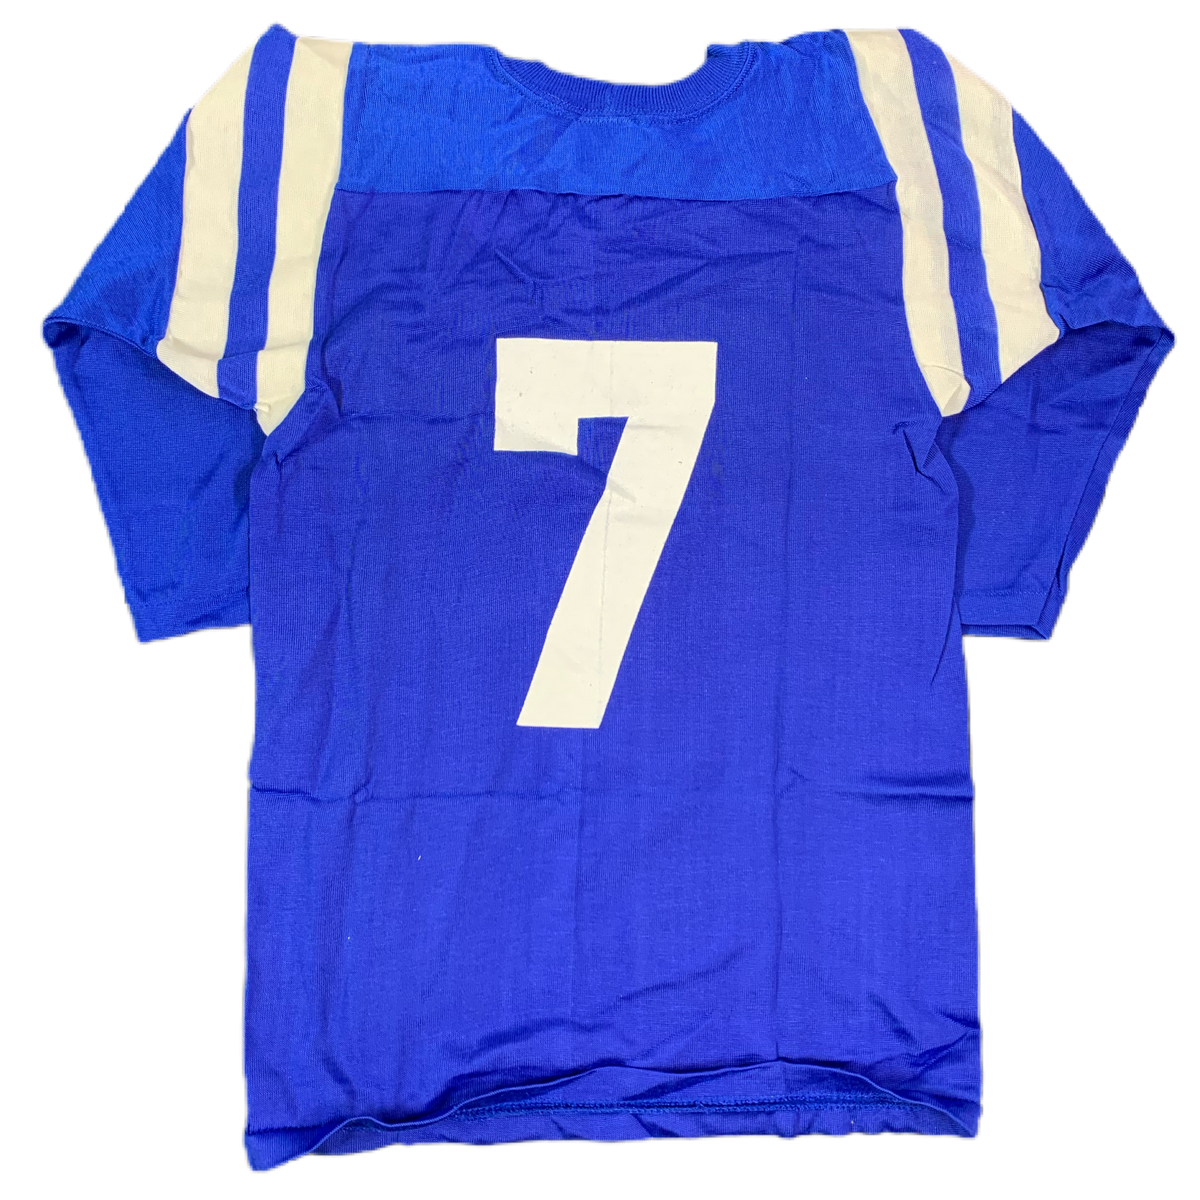 Vintage Indianapolis Colts “Rawlings” Football Jersey - jointcustodydc